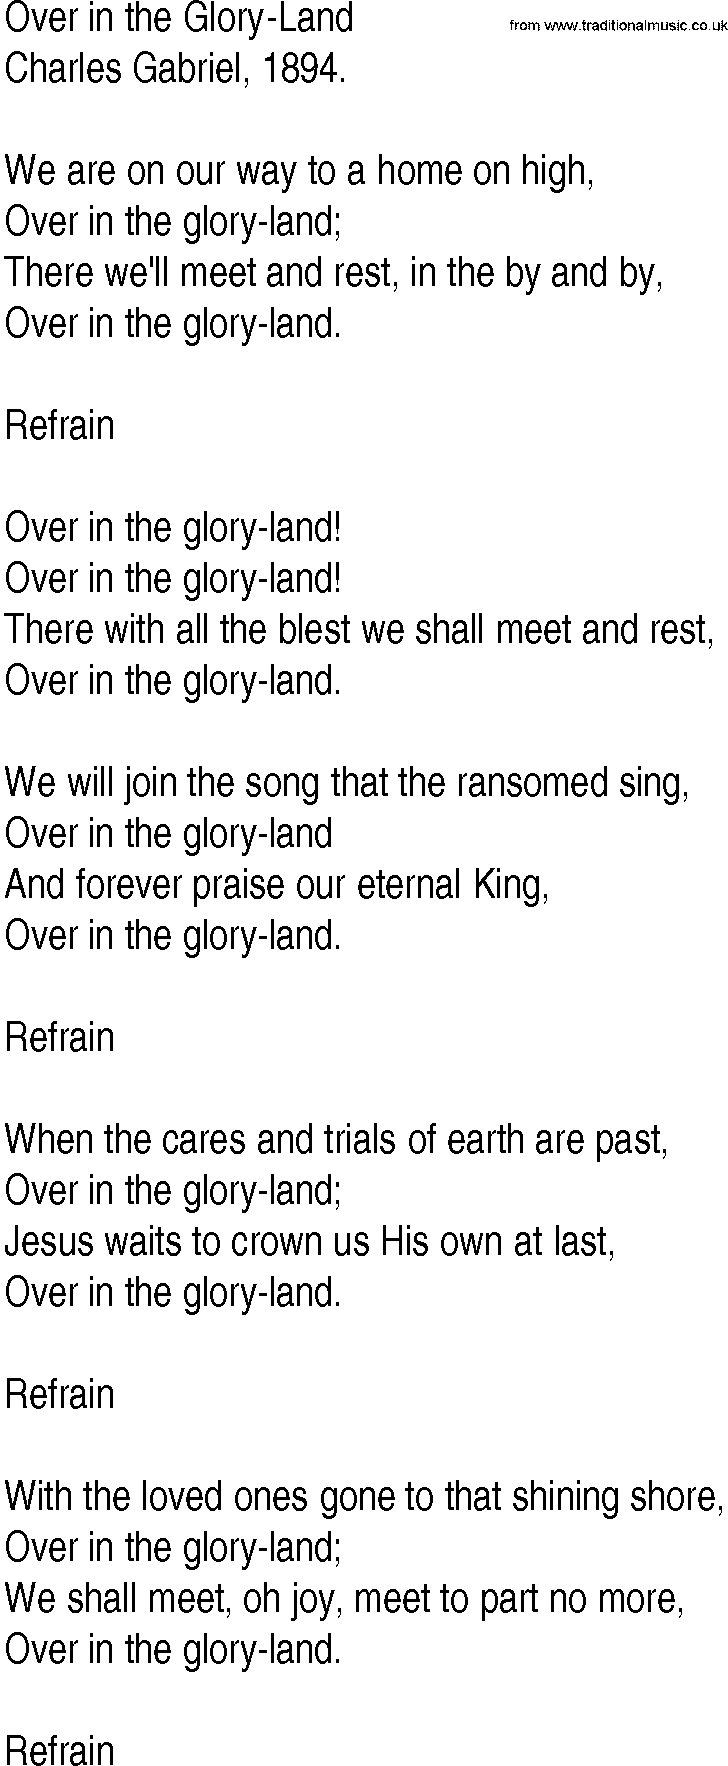 Hymn and Gospel Song: Over in the Glory-Land by Charles Gabriel lyrics